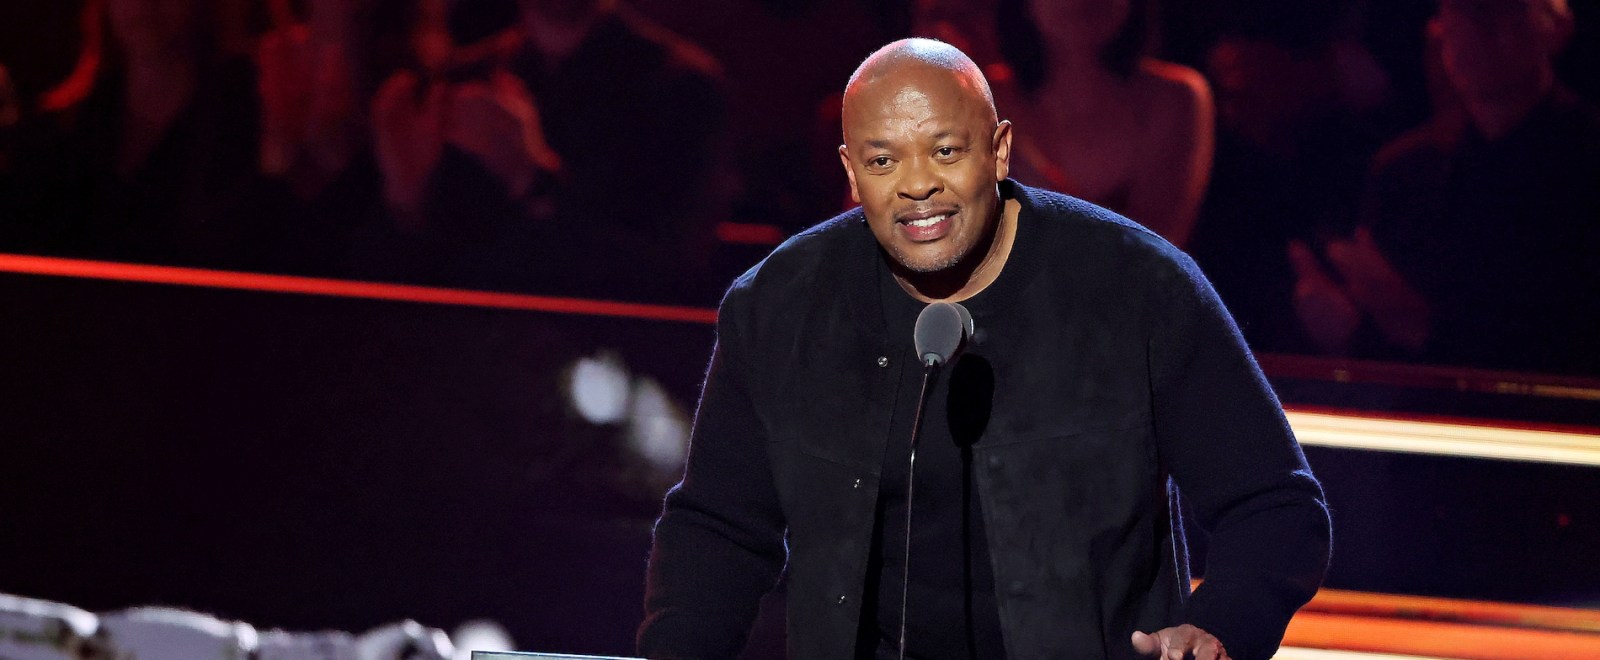 Dr Dre 37th Annual Rock & Roll Hall of Fame Induction Ceremony 2022